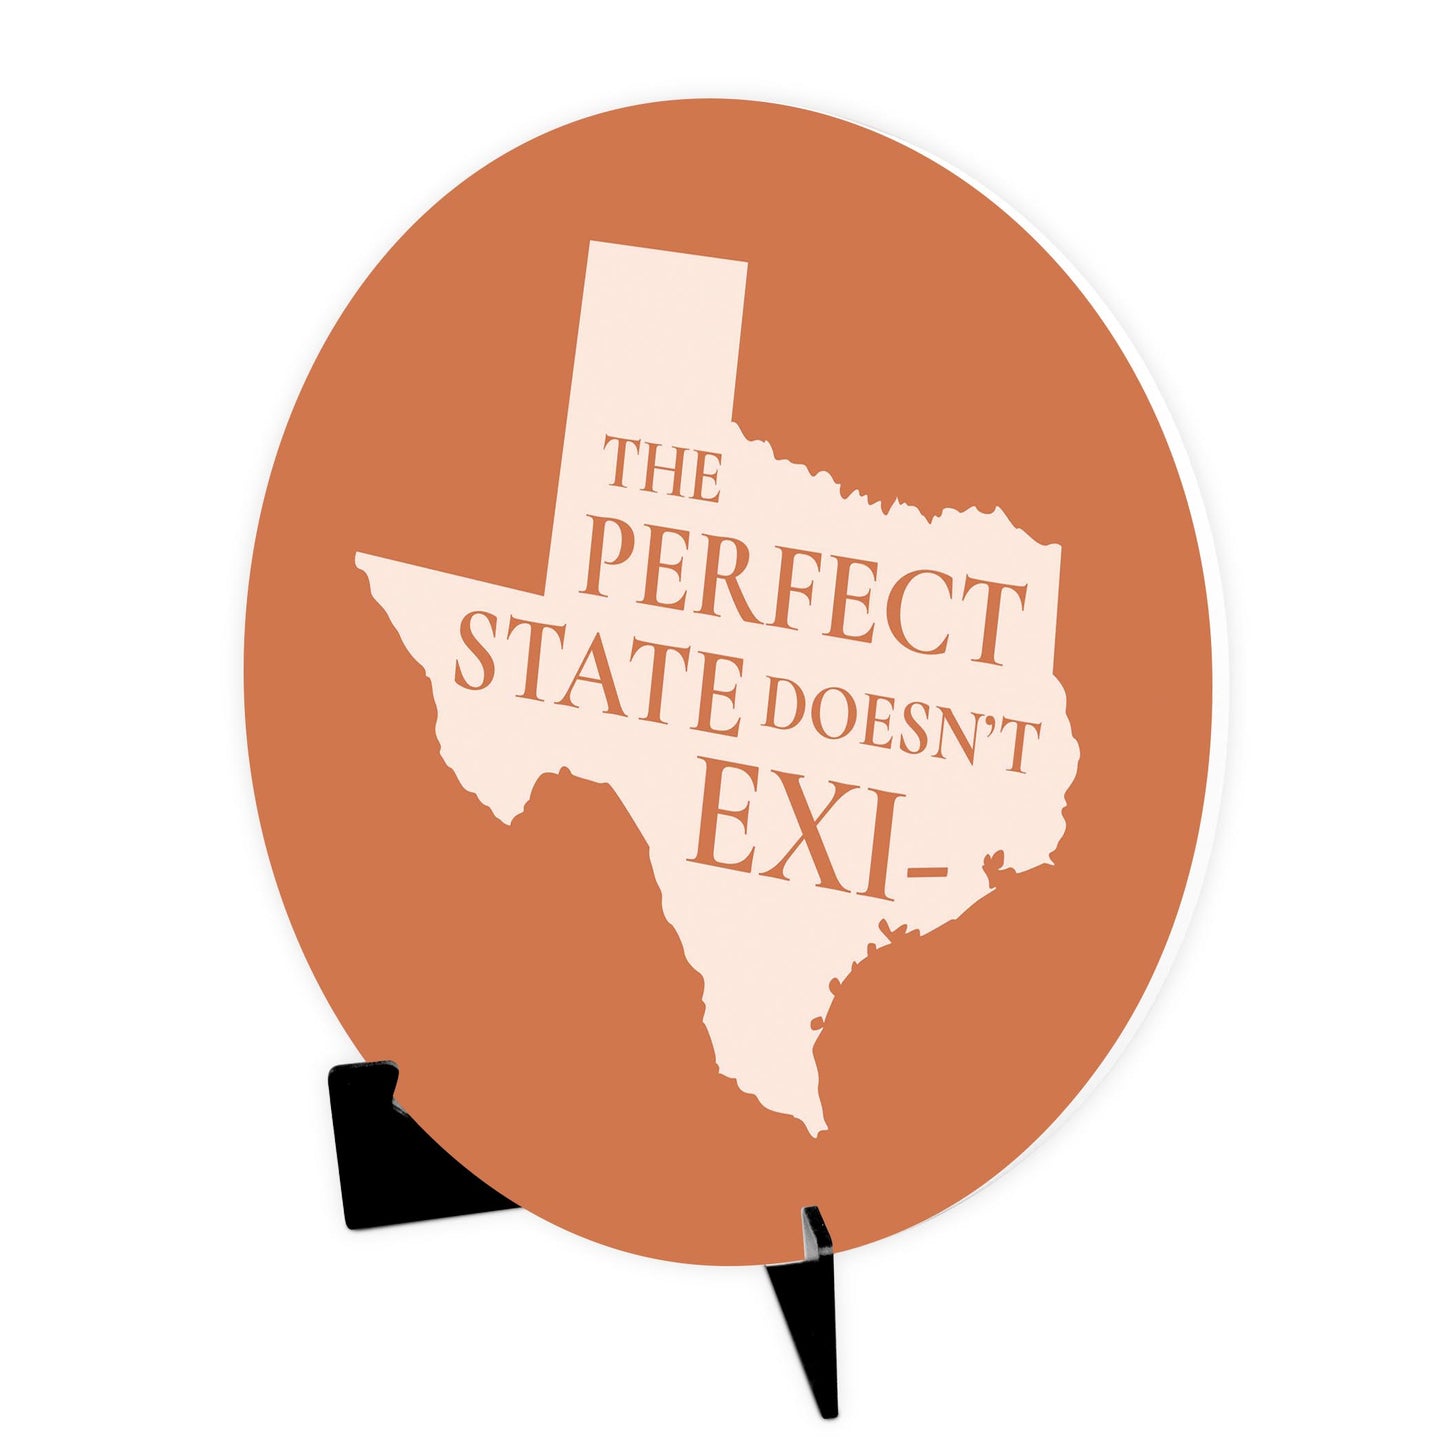 Modern Minimalist Texas The Perfect State Doesnt Exi | Wood Sign | Eaches | Min 1